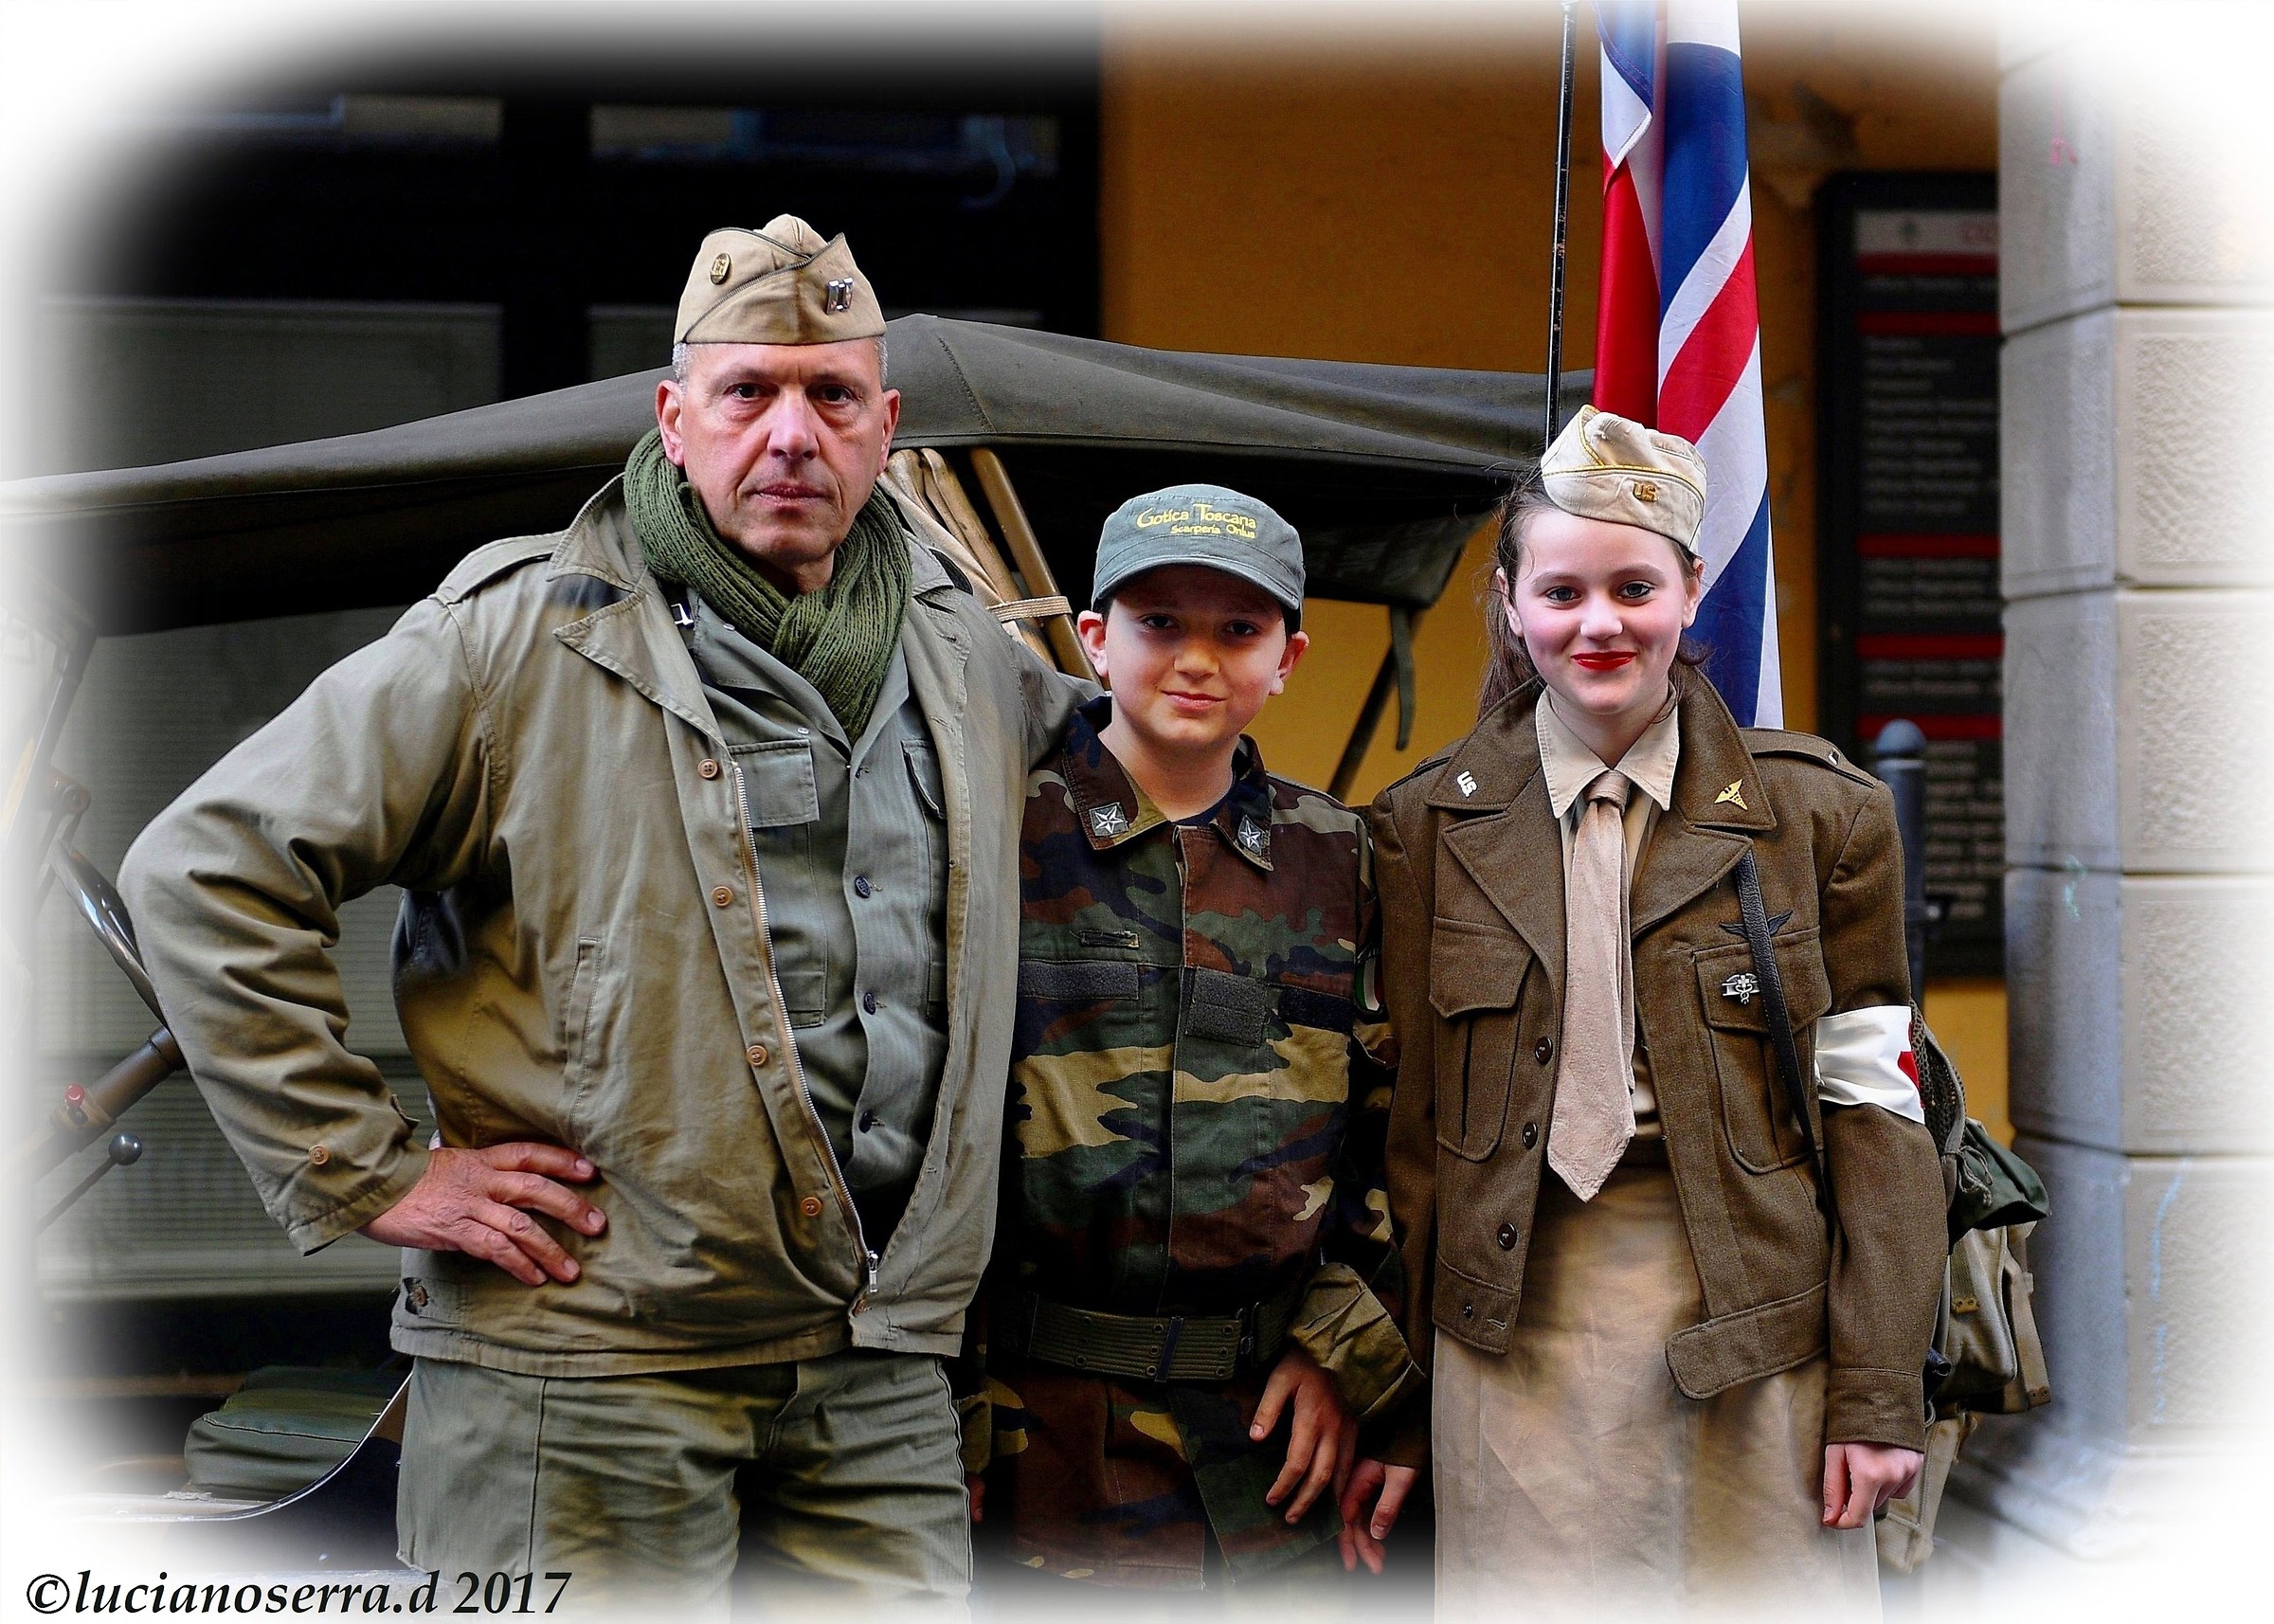 Appearing with military uniforms of World War II...